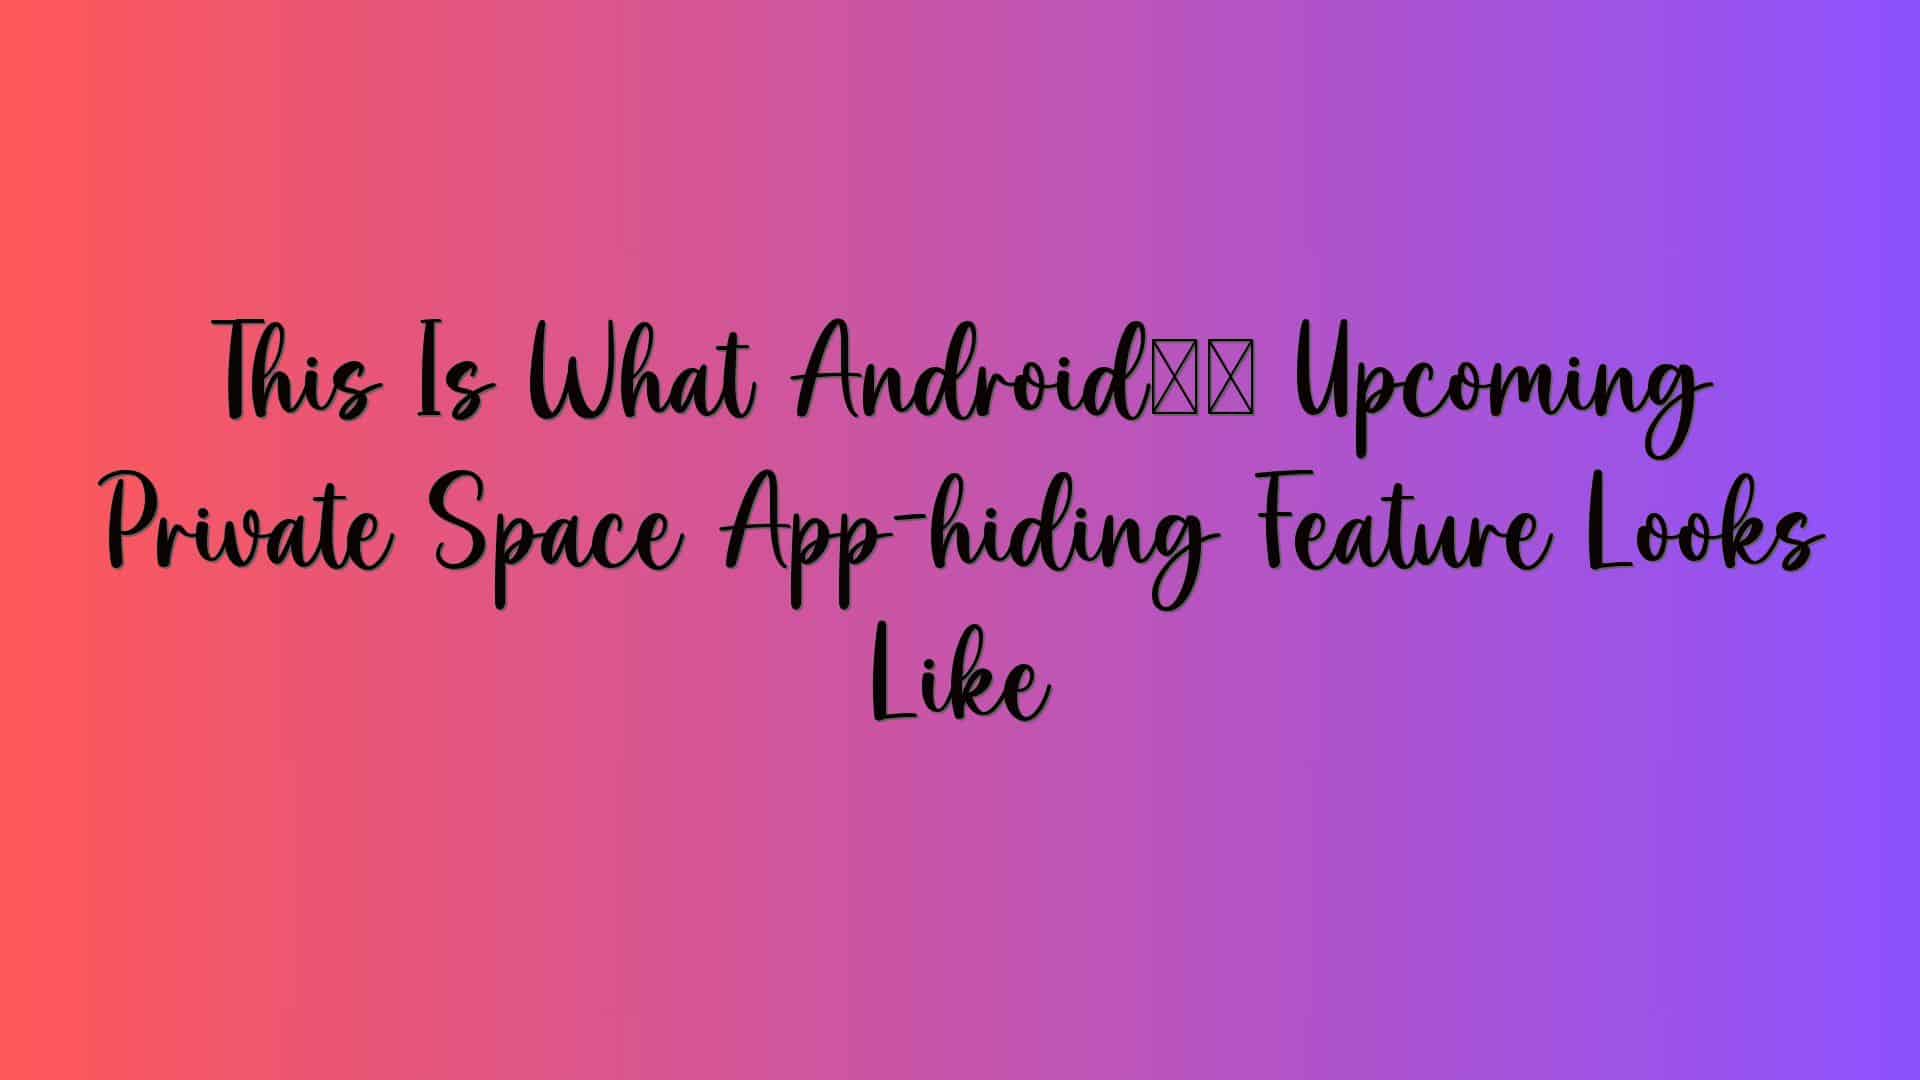 This Is What Android’s Upcoming Private Space App-hiding Feature Looks Like